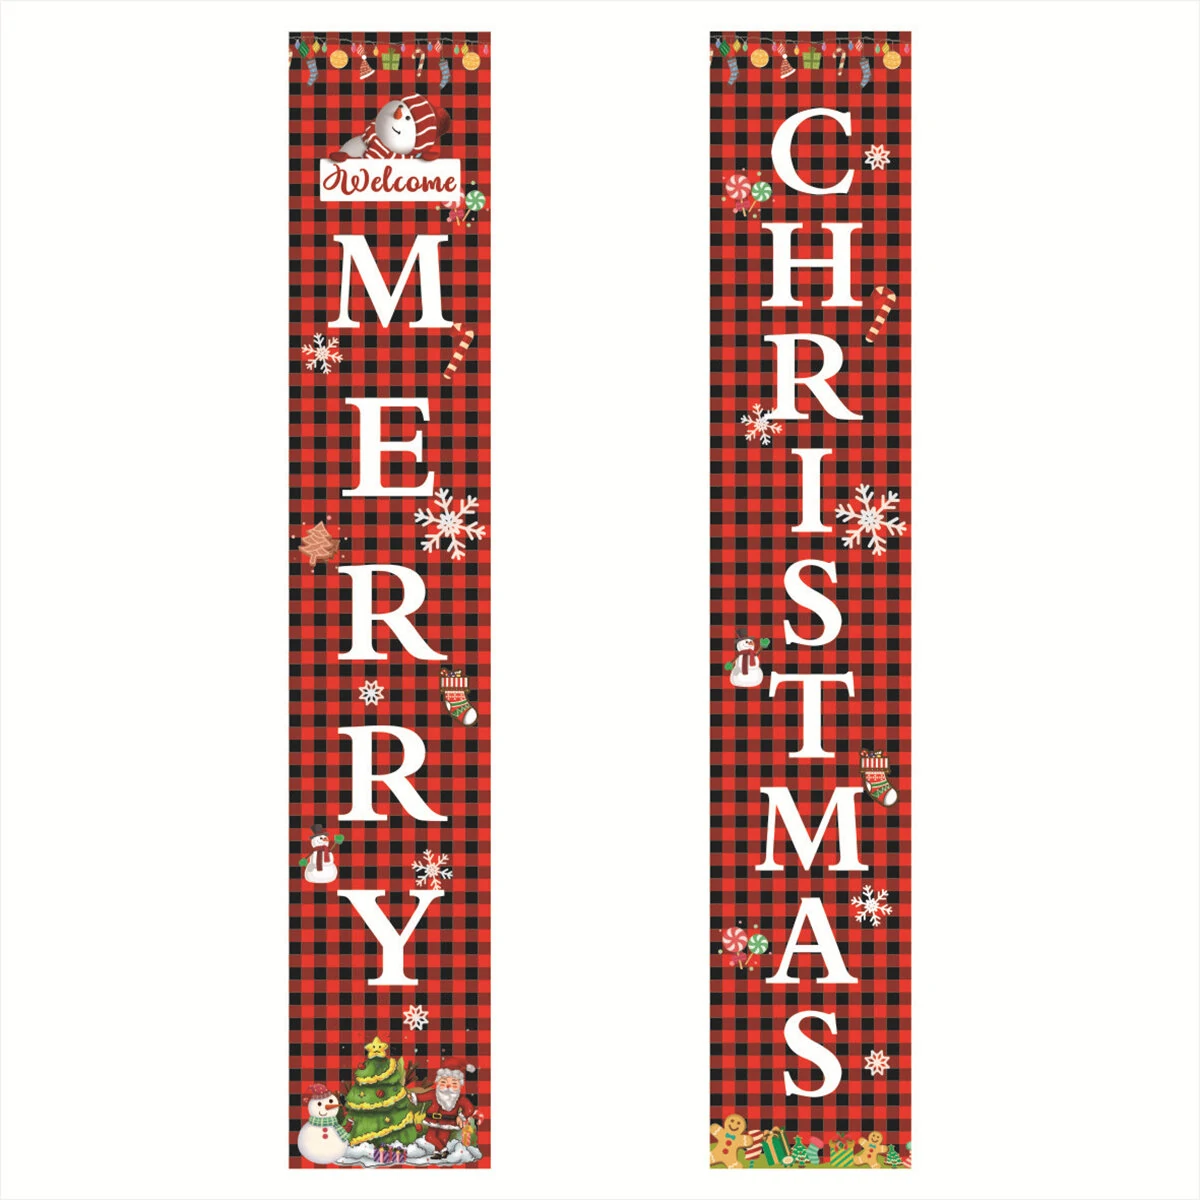 Merry christmas porch banner sign door banner home hanging christmas ornaments for christmas party decor